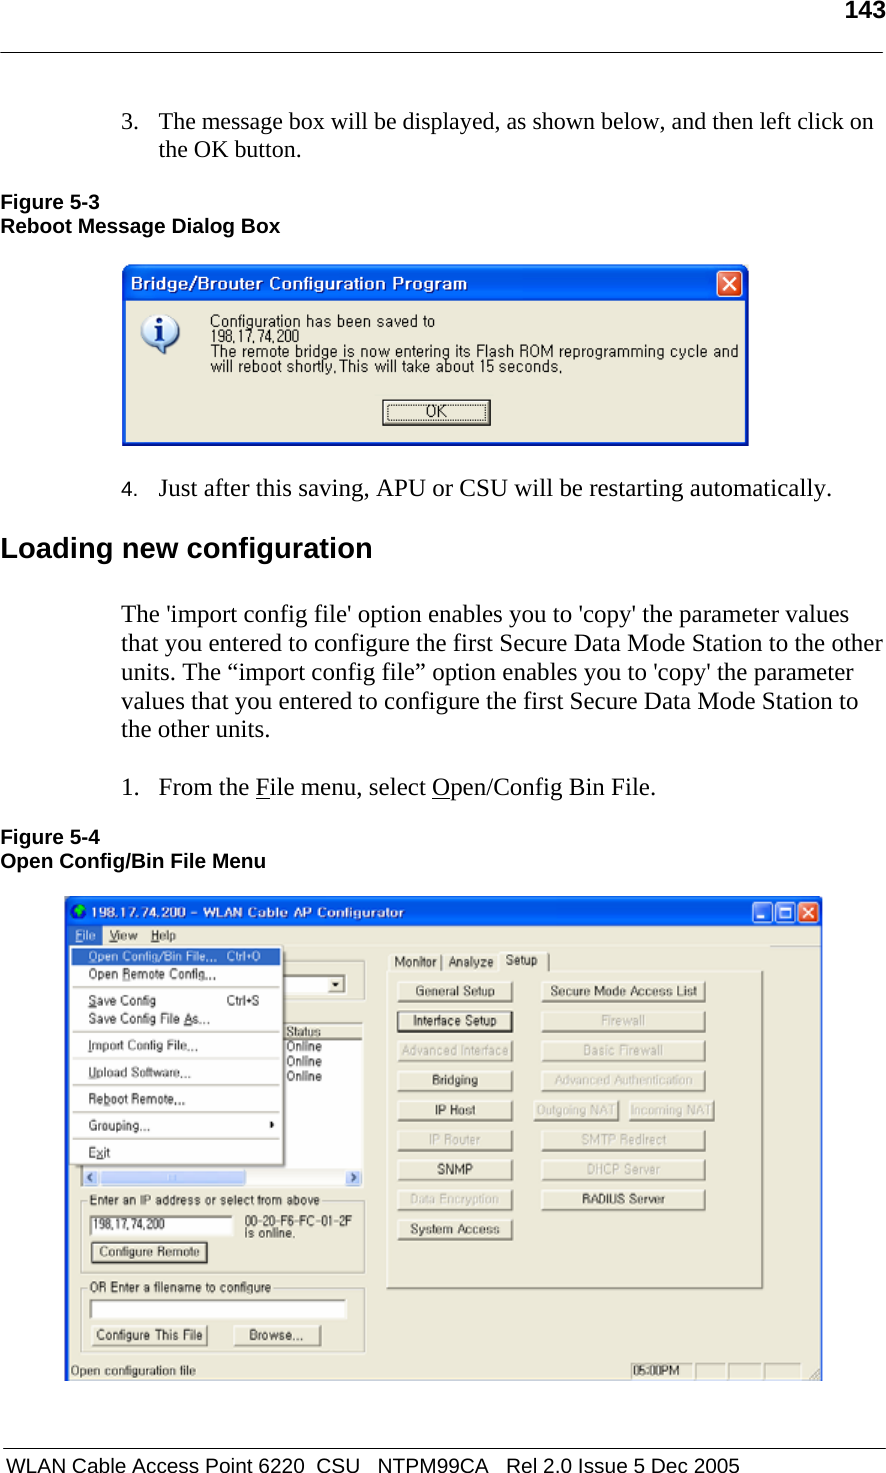   143   WLAN Cable Access Point 6220  CSU   NTPM99CA   Rel 2.0 Issue 5 Dec 2005 3. The message box will be displayed, as shown below, and then left click on the OK button.  Figure 5-3 Reboot Message Dialog Box    4.  Just after this saving, APU or CSU will be restarting automatically.  Loading new configuration  The &apos;import config file&apos; option enables you to &apos;copy&apos; the parameter values that you entered to configure the first Secure Data Mode Station to the other units. The “import config file” option enables you to &apos;copy&apos; the parameter values that you entered to configure the first Secure Data Mode Station to the other units.  1. From the File menu, select Open/Config Bin File.  Figure 5-4 Open Config/Bin File Menu    